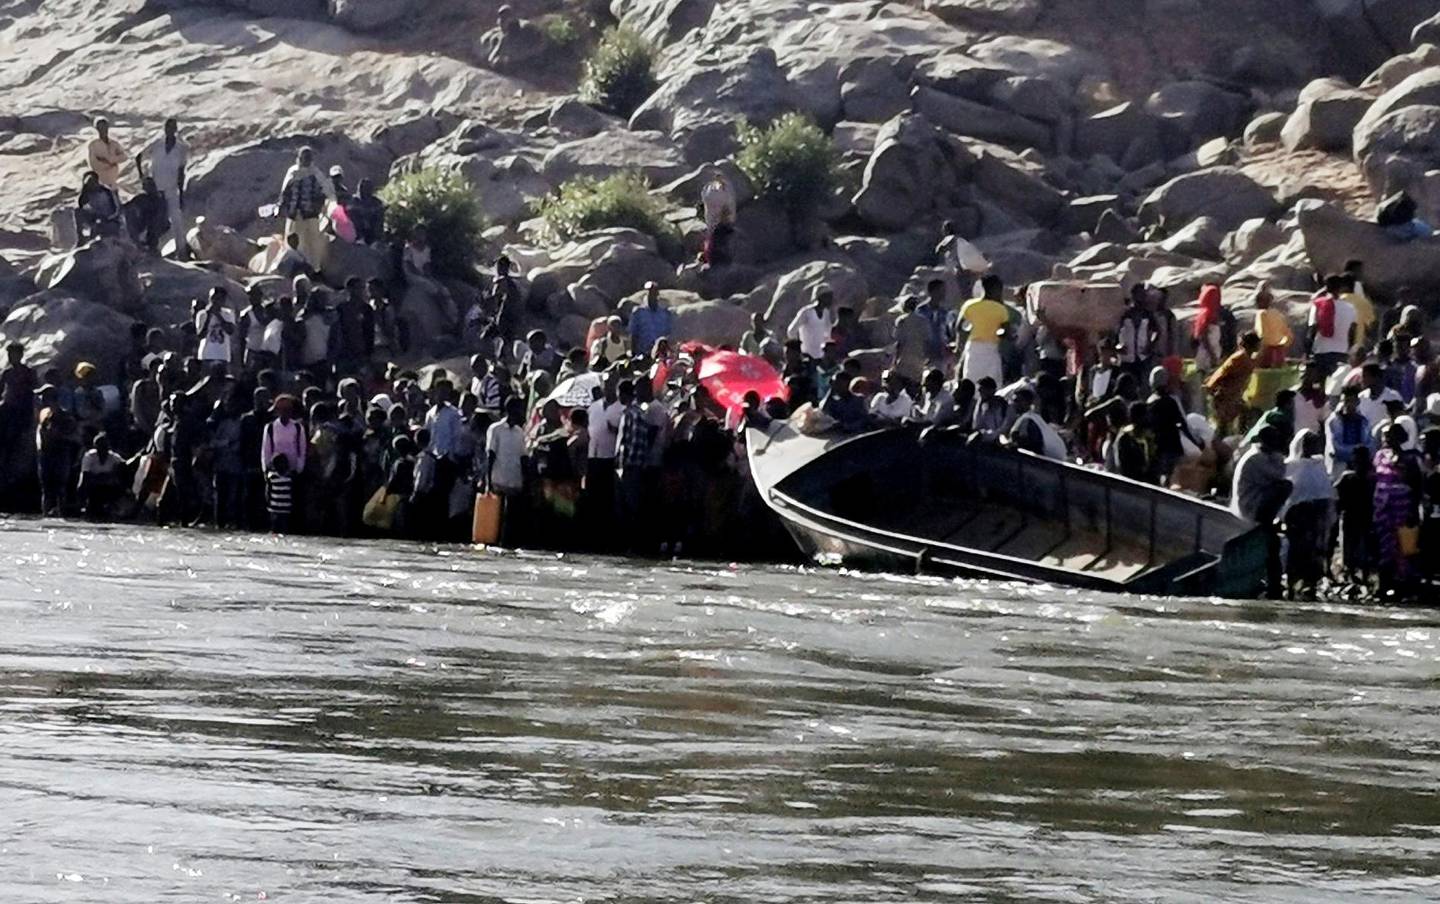 FILE PHOTO: Ethiopians who fled the ongoing fighting in Tigray region prepare to cross the Setit River on the Sudan-Ethiopia border in Hamdait village in eastern Kassala state, Sudan November 14, 2020. REUTERS/El Tayeb Siddig/File Photo